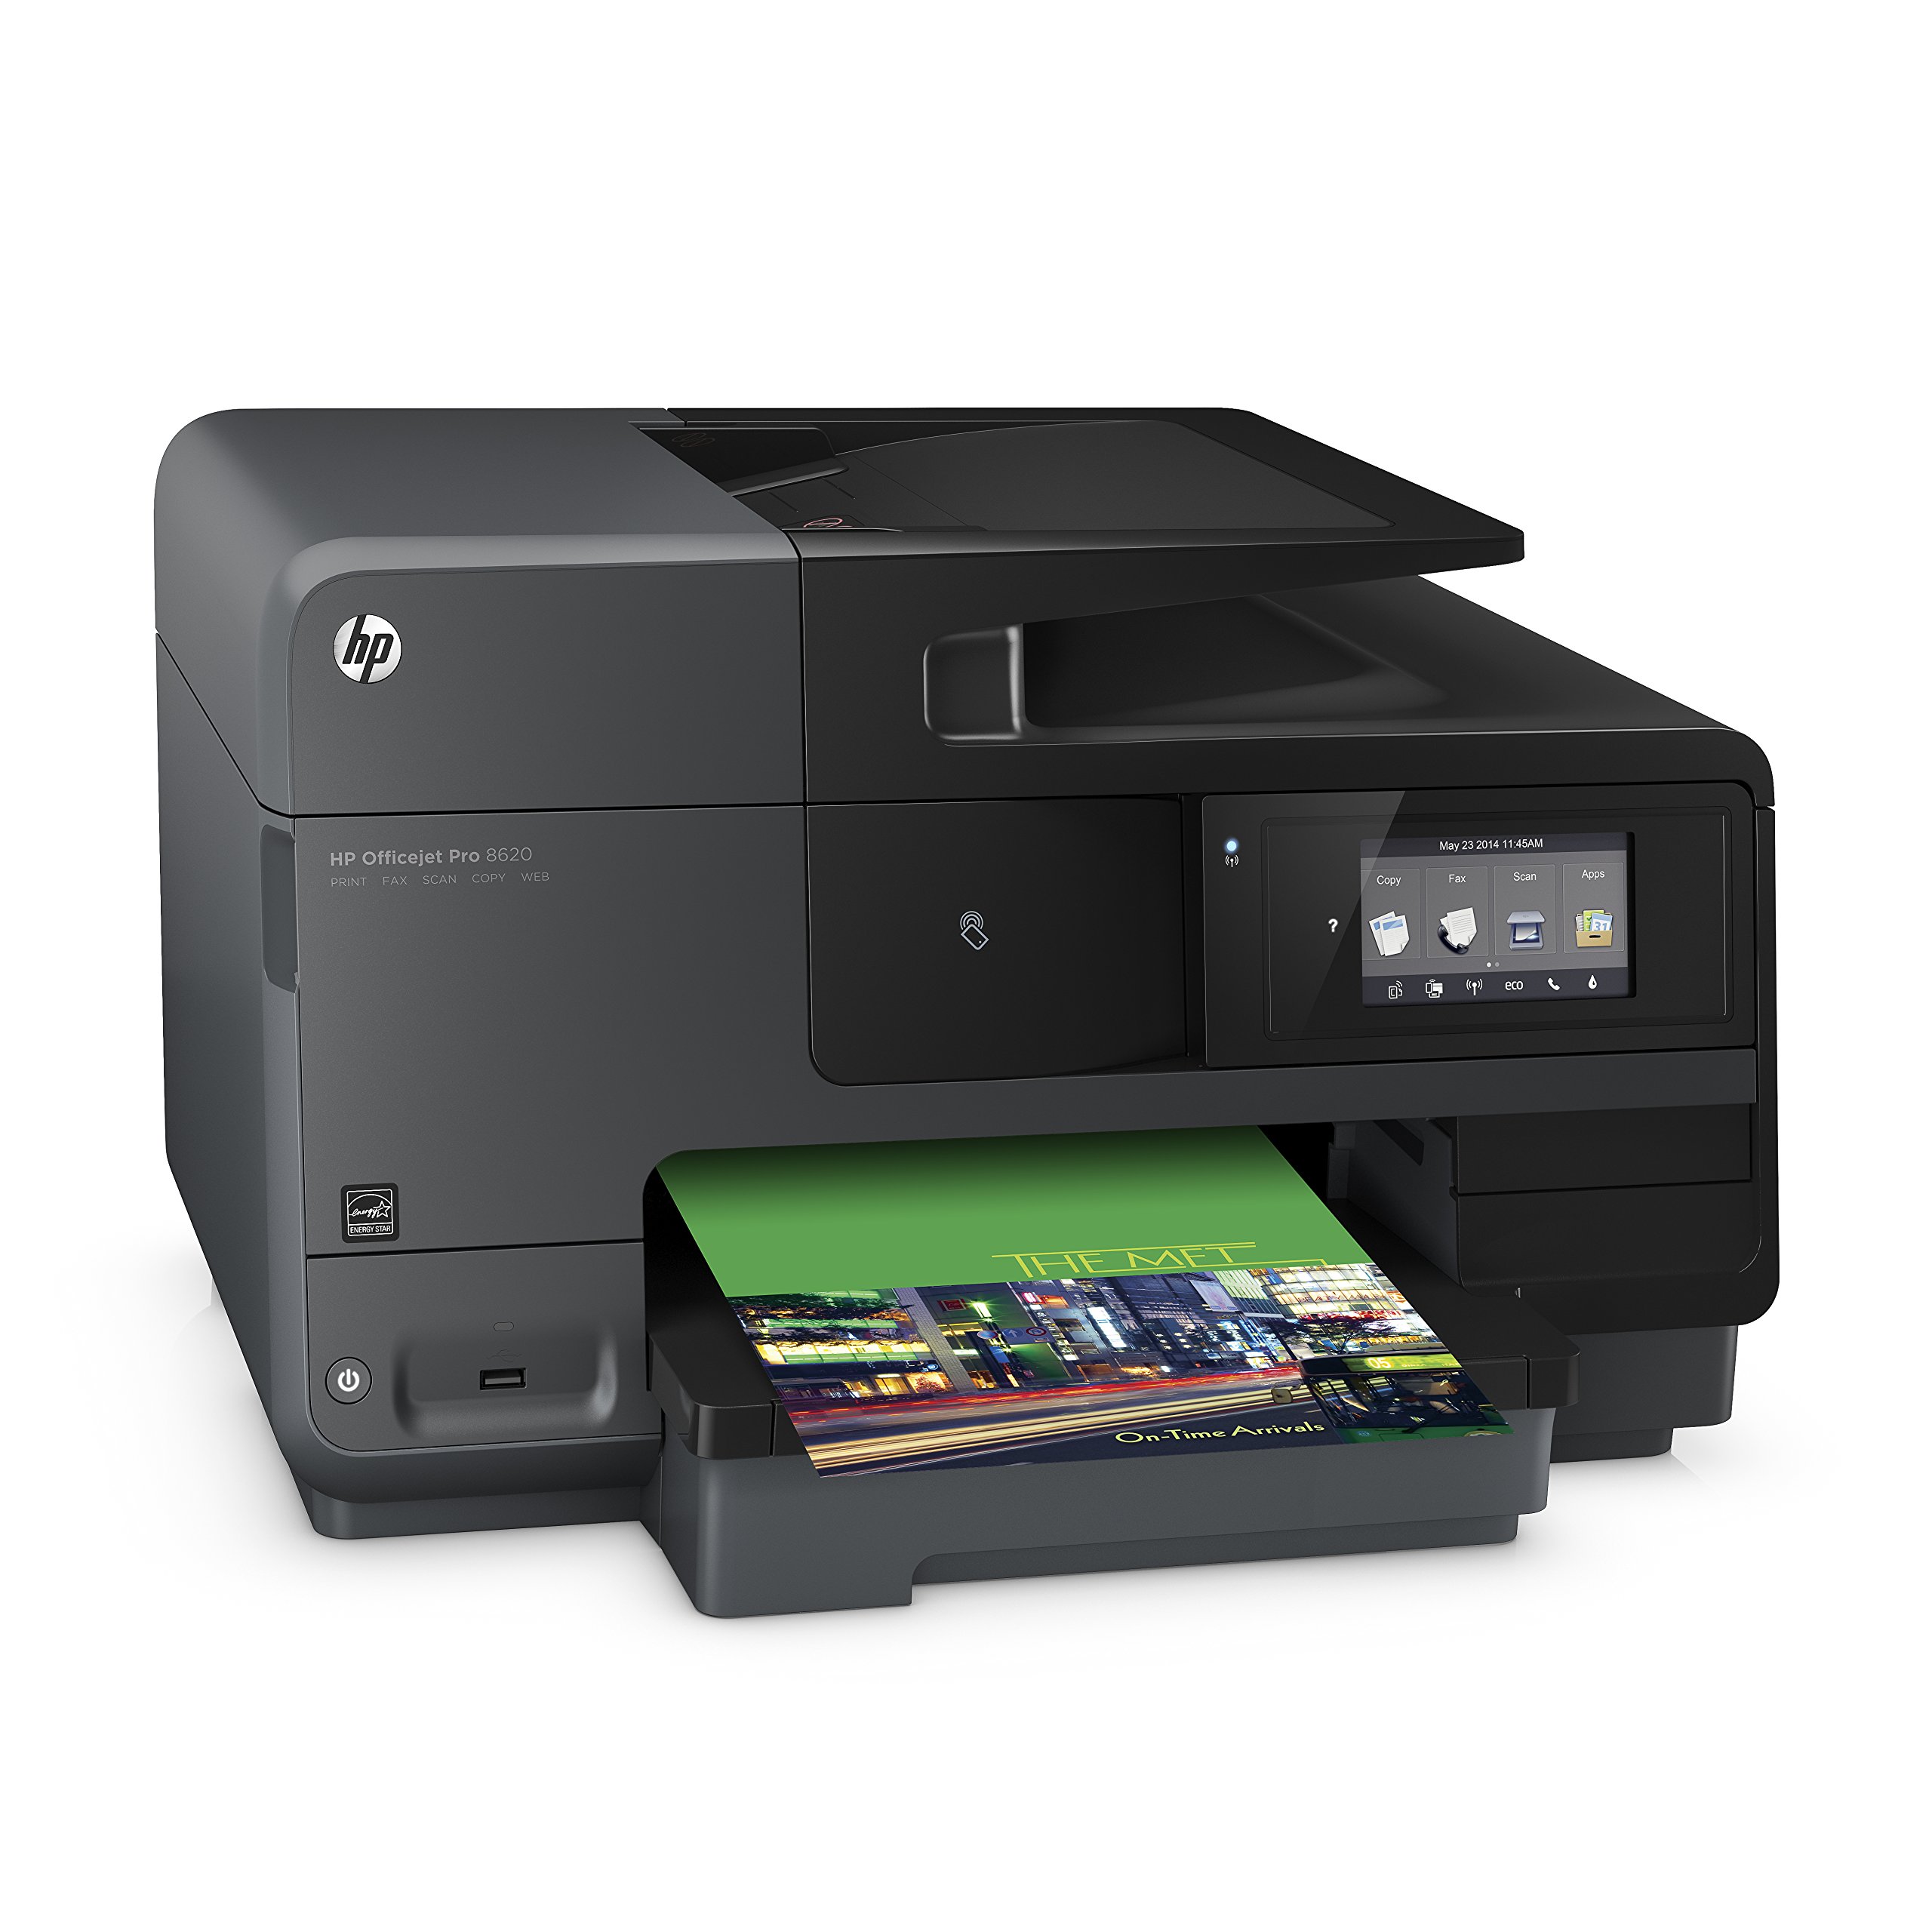 Officejet Pro 8610 e-All-in-One Printer series